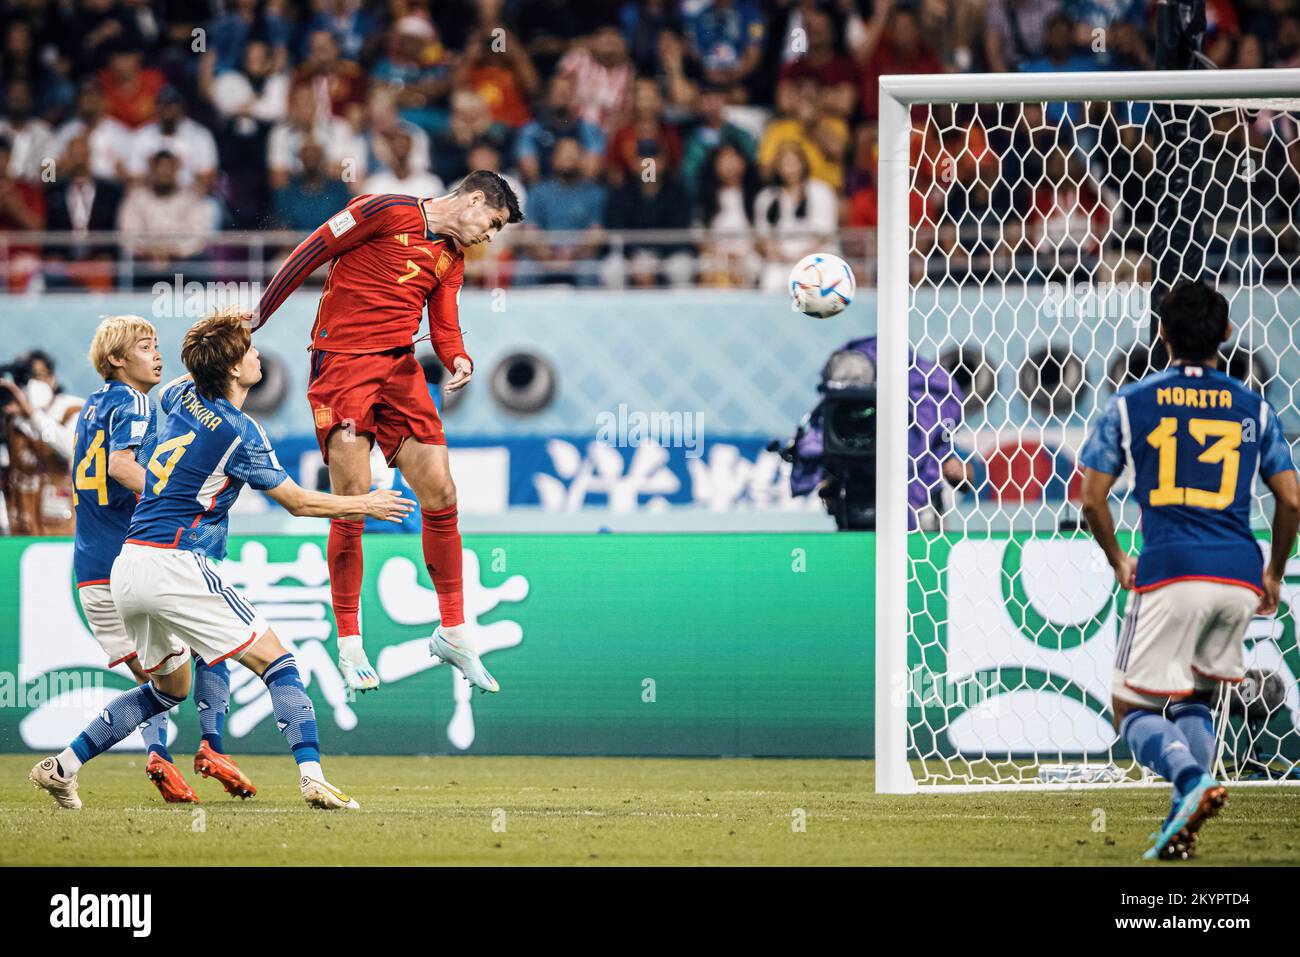 Doha, Catar. 01st Dec, 2022. MORATA Alvaro of Spain heads to score during a match between Japan and Spain, valid for the group stage of the World Cup, held at the Khalifa International Stadium in Doha, Qatar. Credit: Marcelo Machado de Melo/FotoArena/Alamy Live News Stock Photo